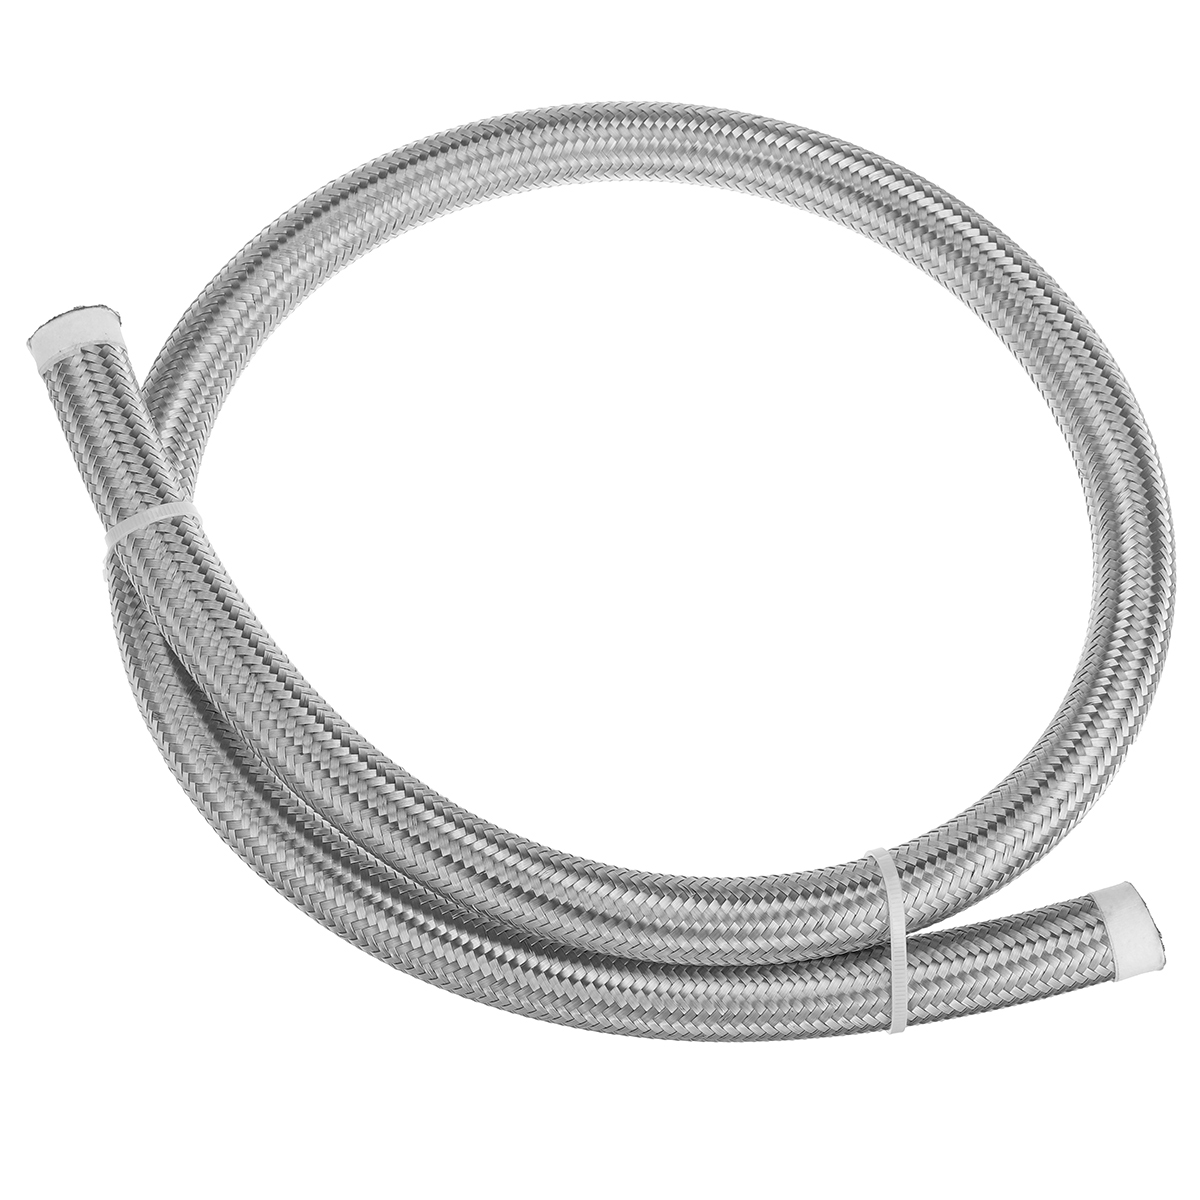 AN10 10AN Stainless Steel Nylon Braided Oil Fuel Gas Hose Line Kit 3 Meters - Auto GoShop